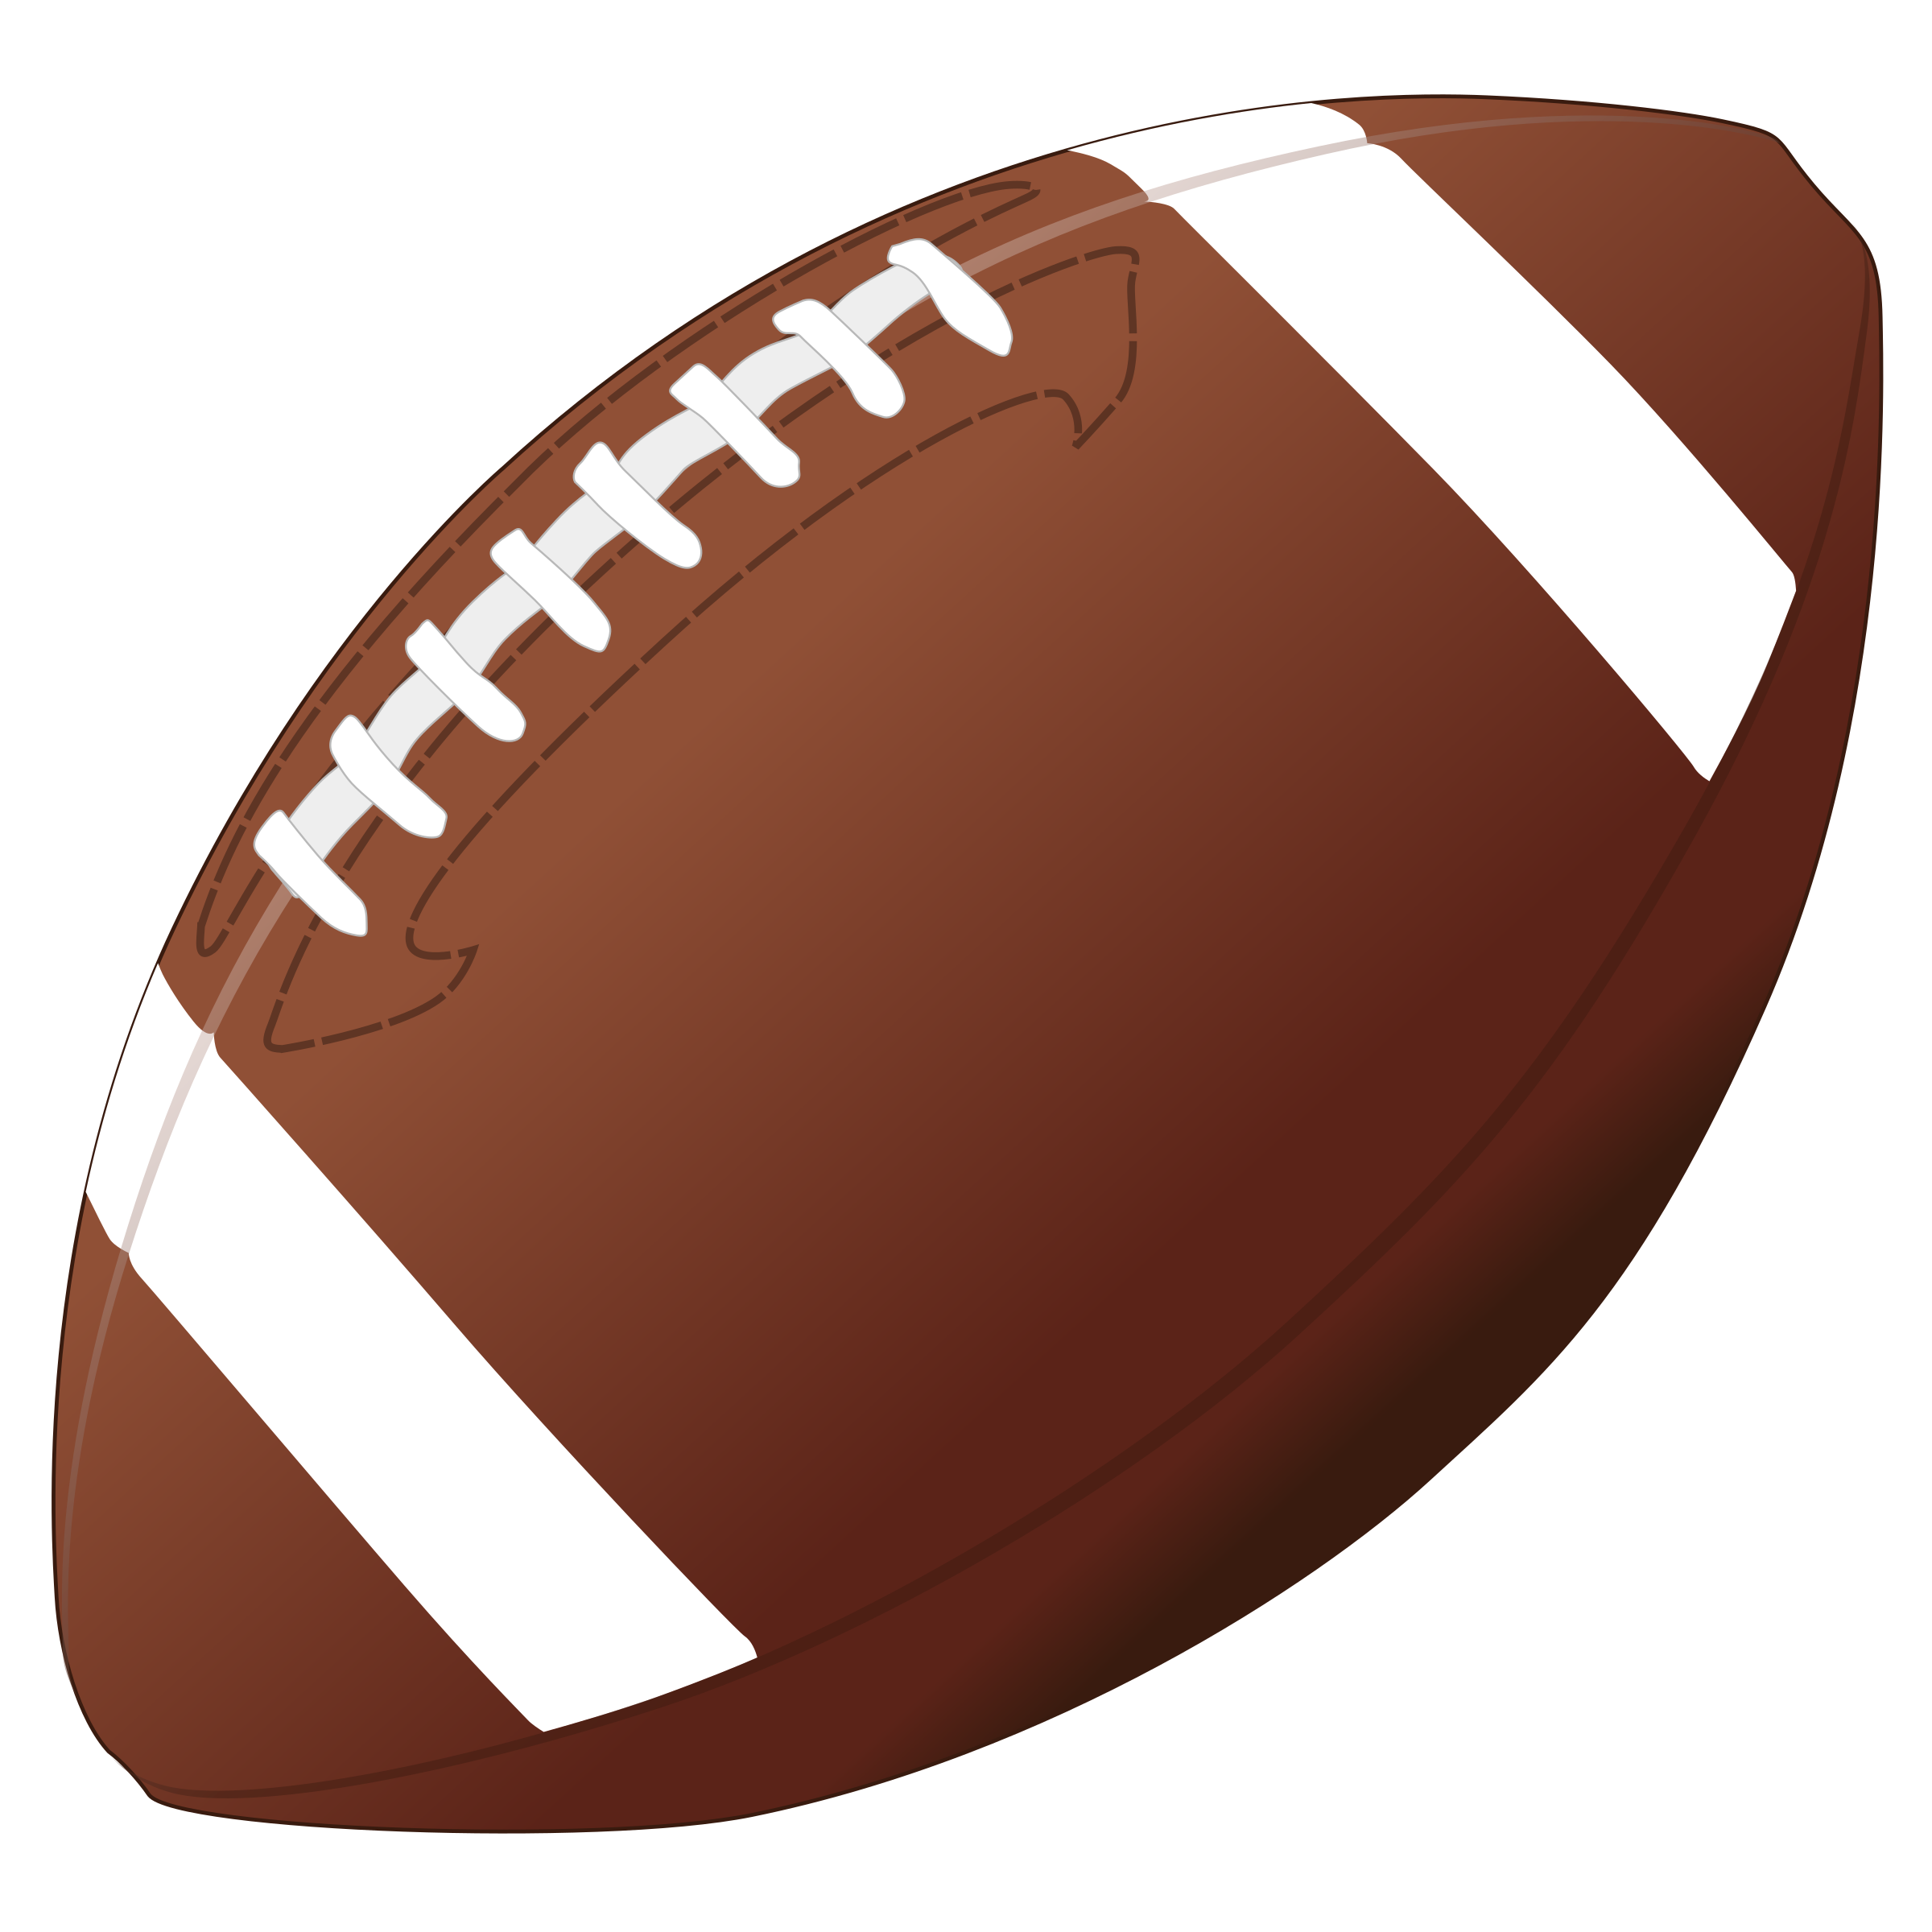 File:Football pictogram hat-t